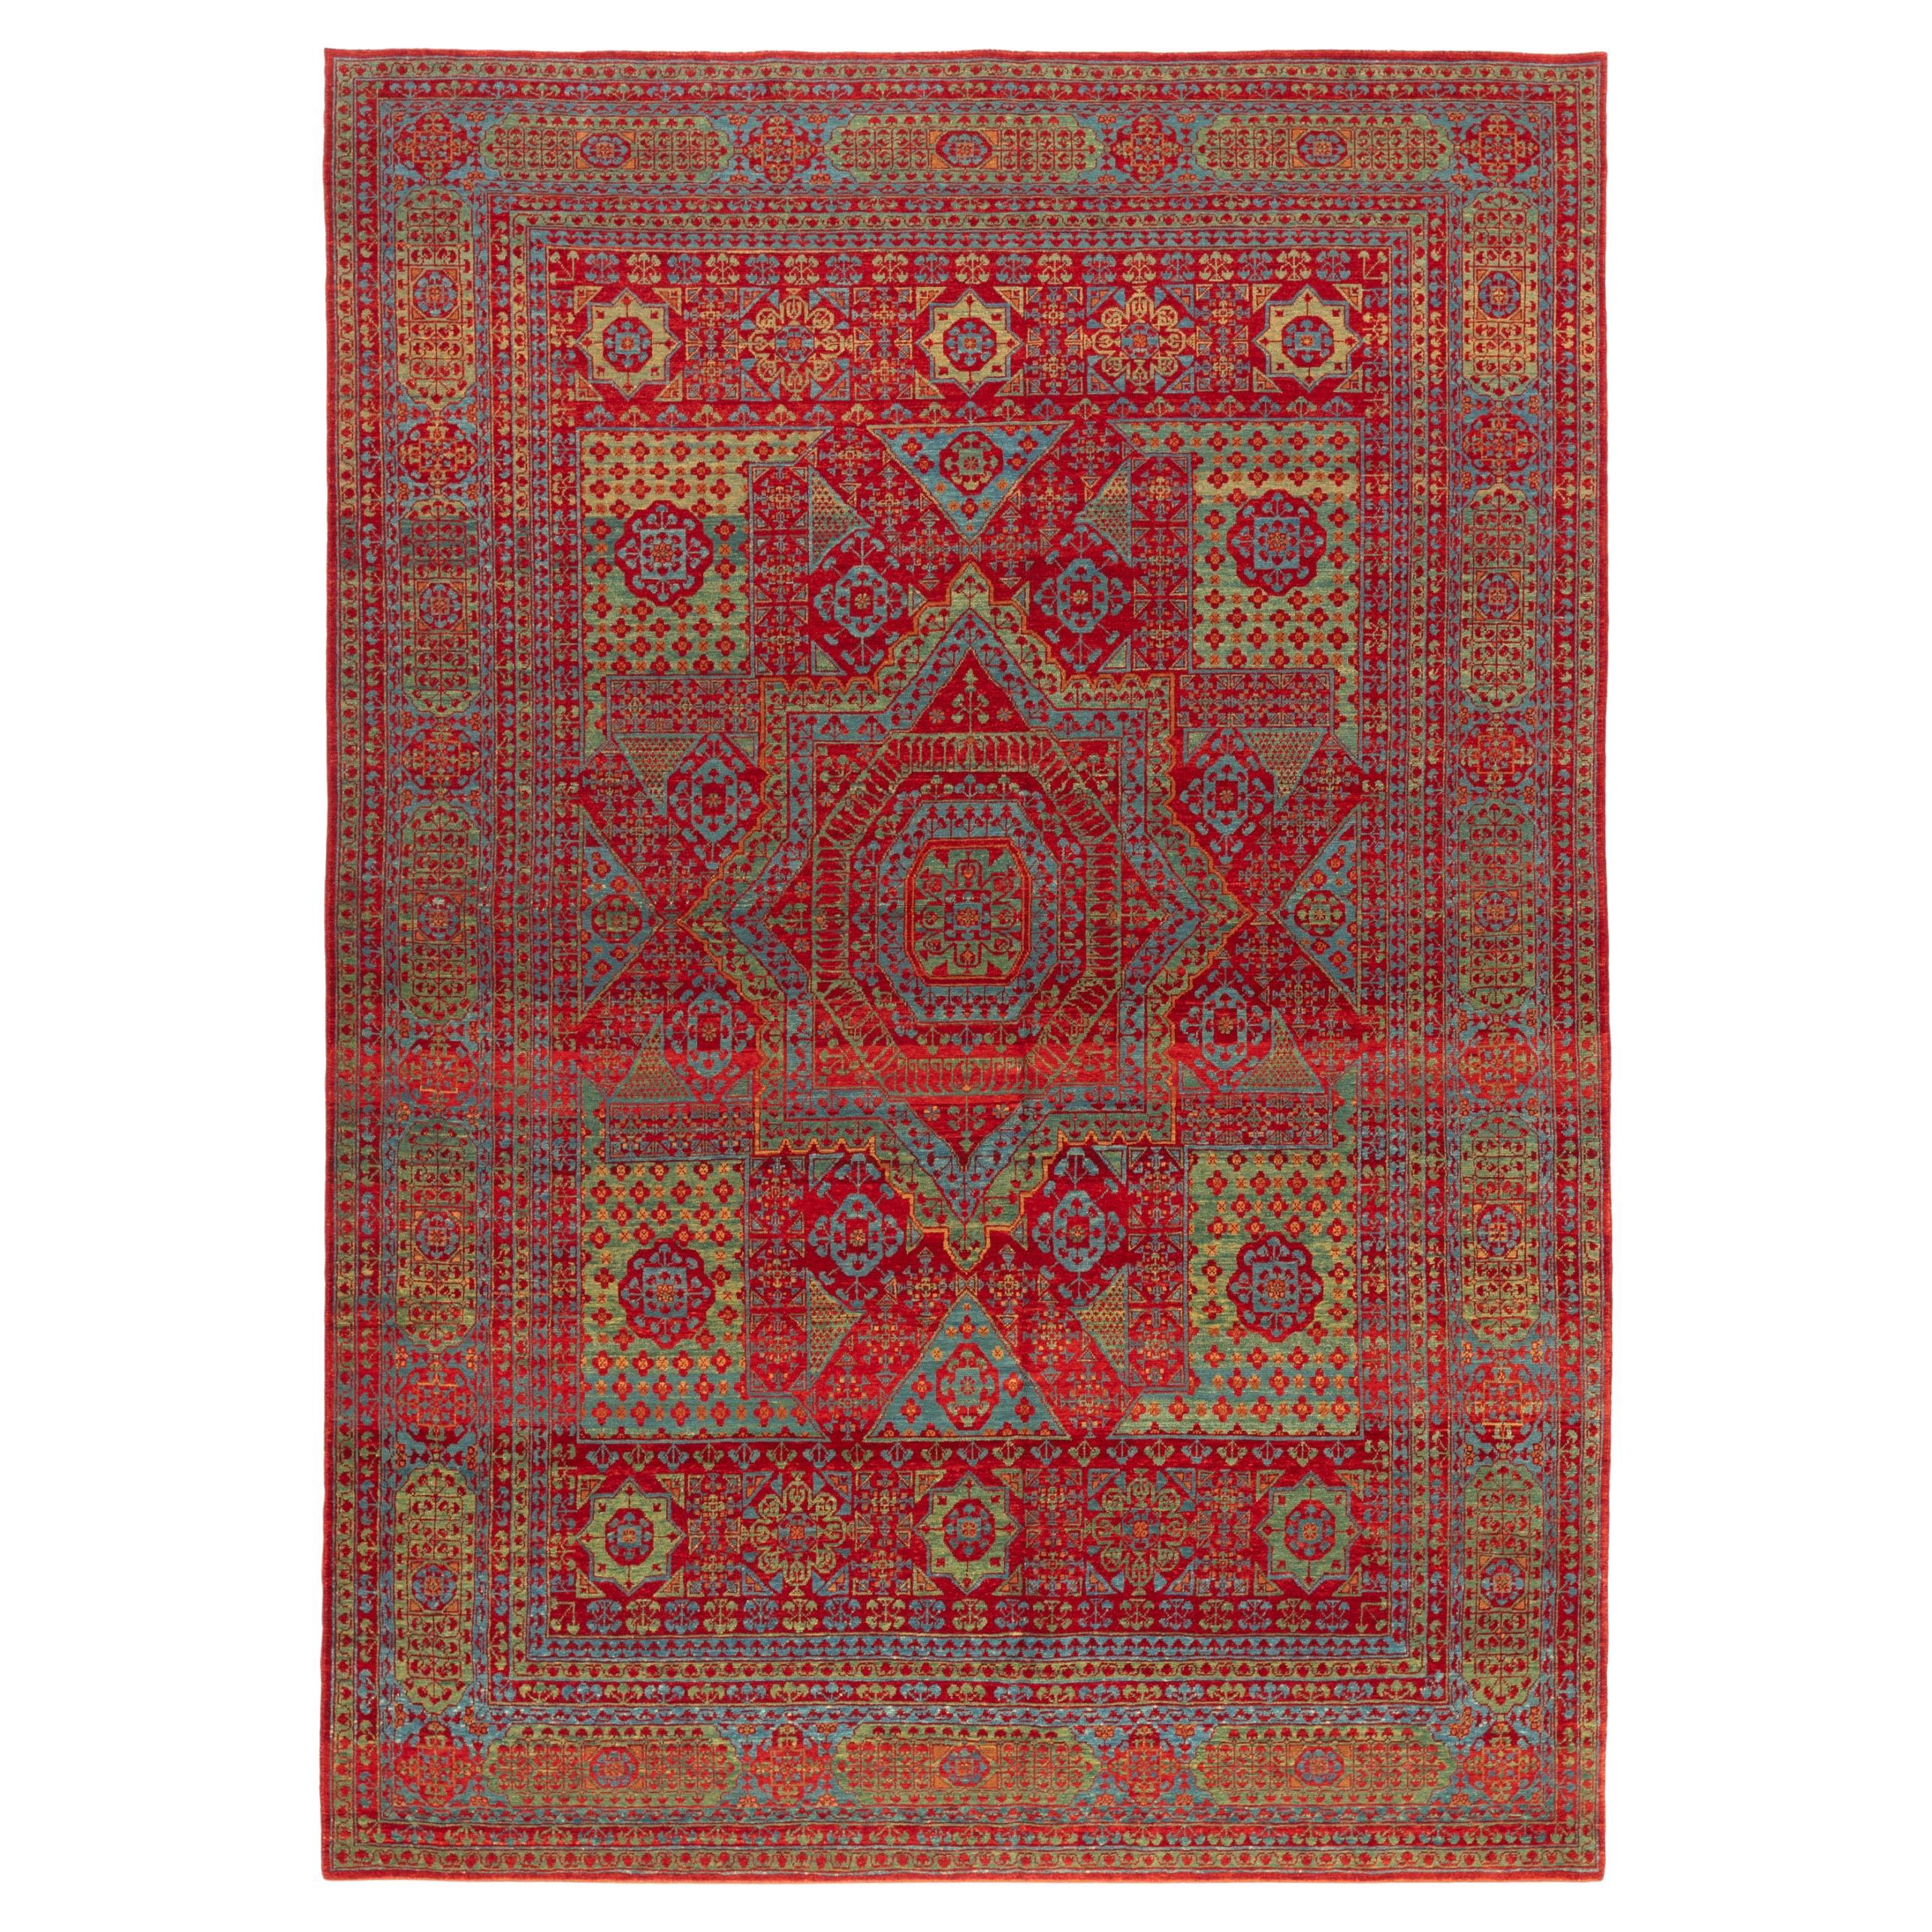 Ararat Rugs Mamluk Rug with Central Star, 16th C. Revival Carpet, Natural Dyed